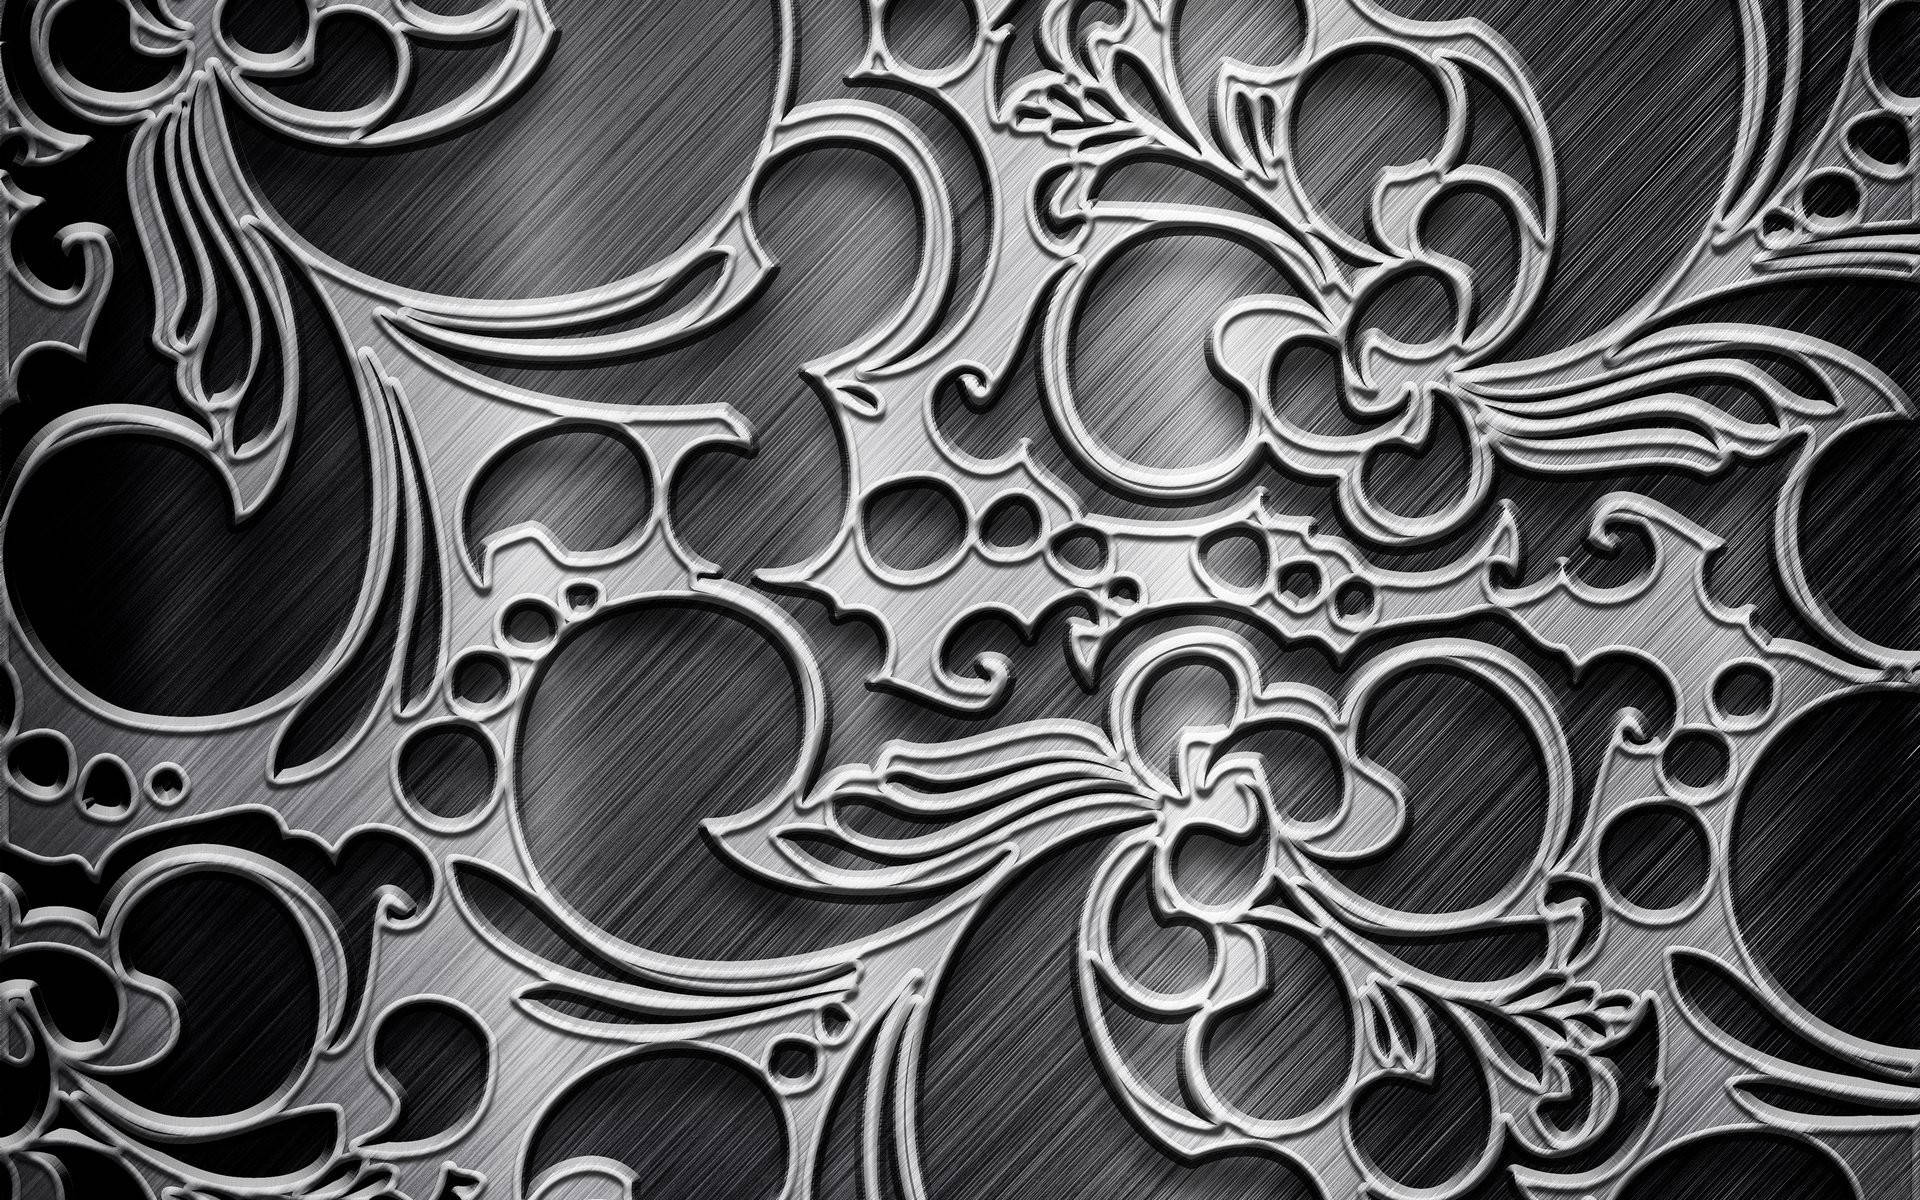 Ornate Patterned Metal Texture Background